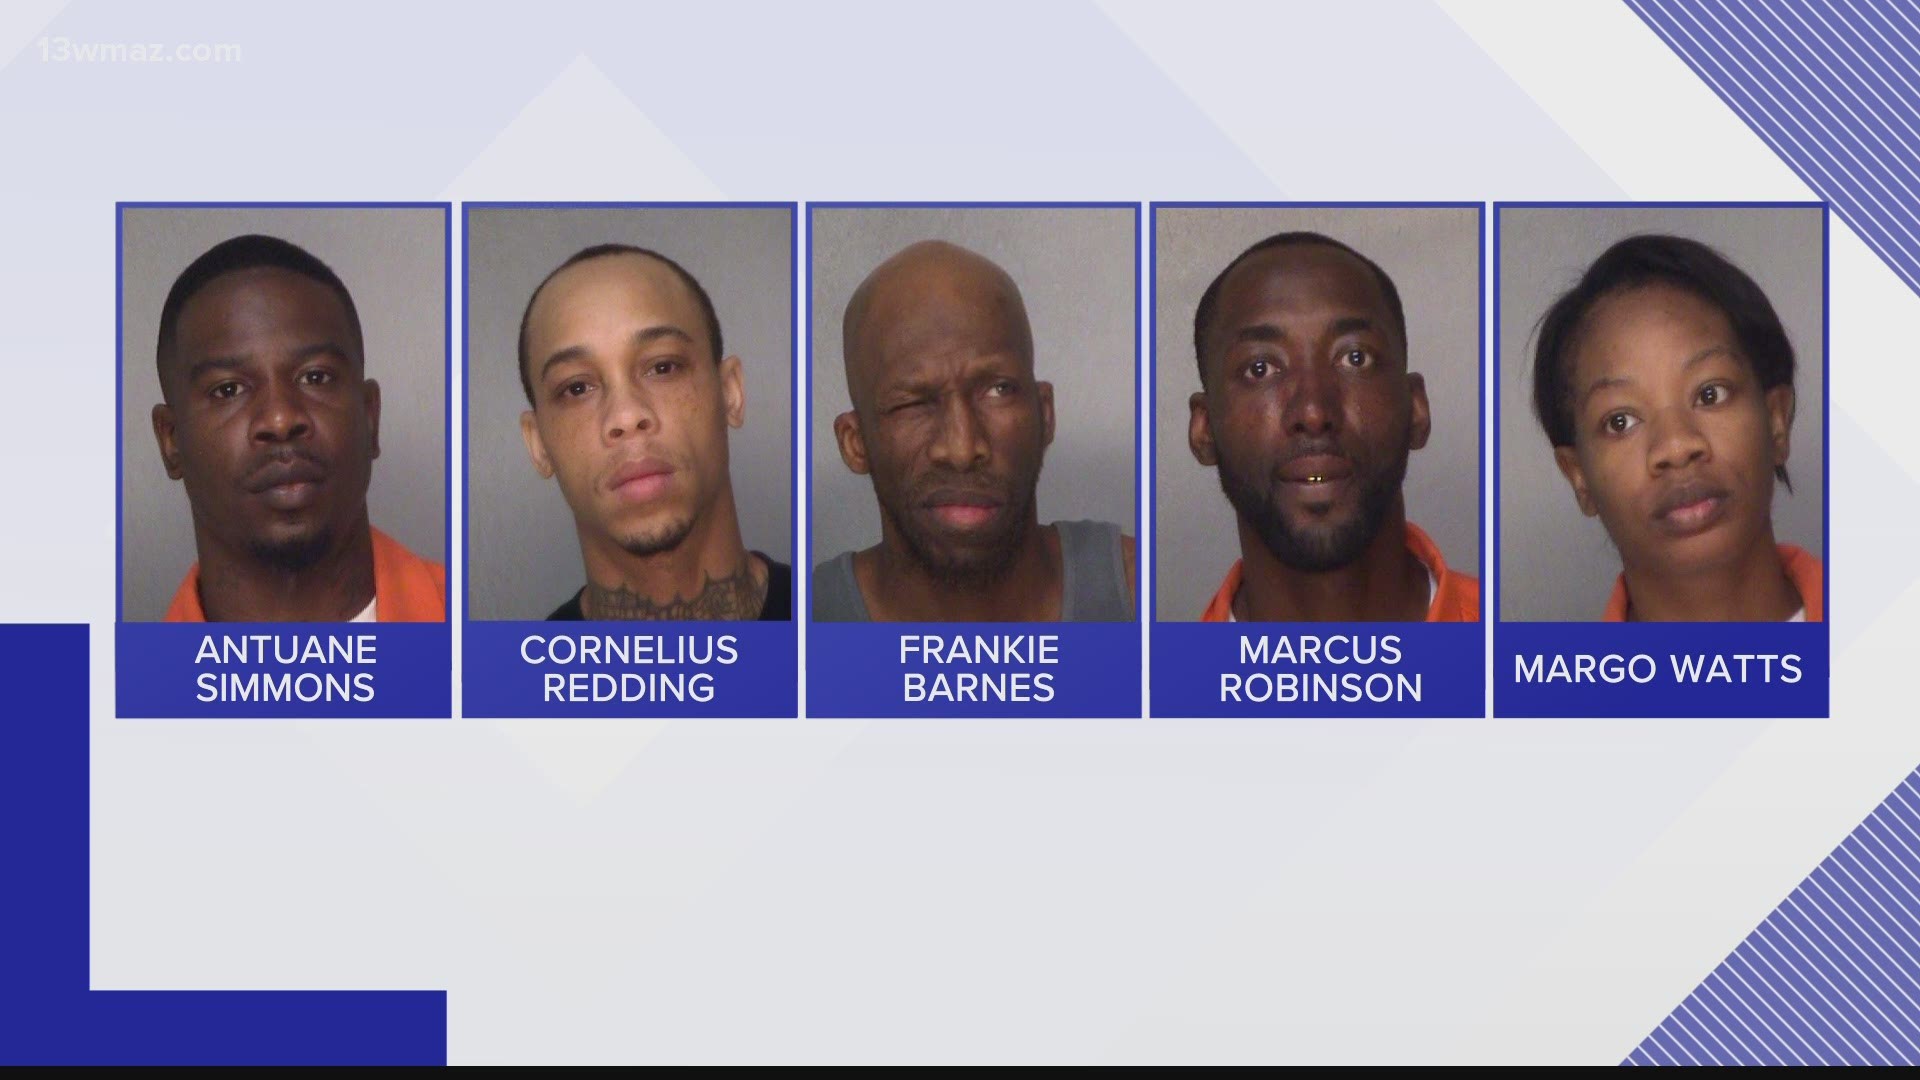 A Bibb County grand jury has indicted five people in a racketeering case that involves almost 60 burglaries.